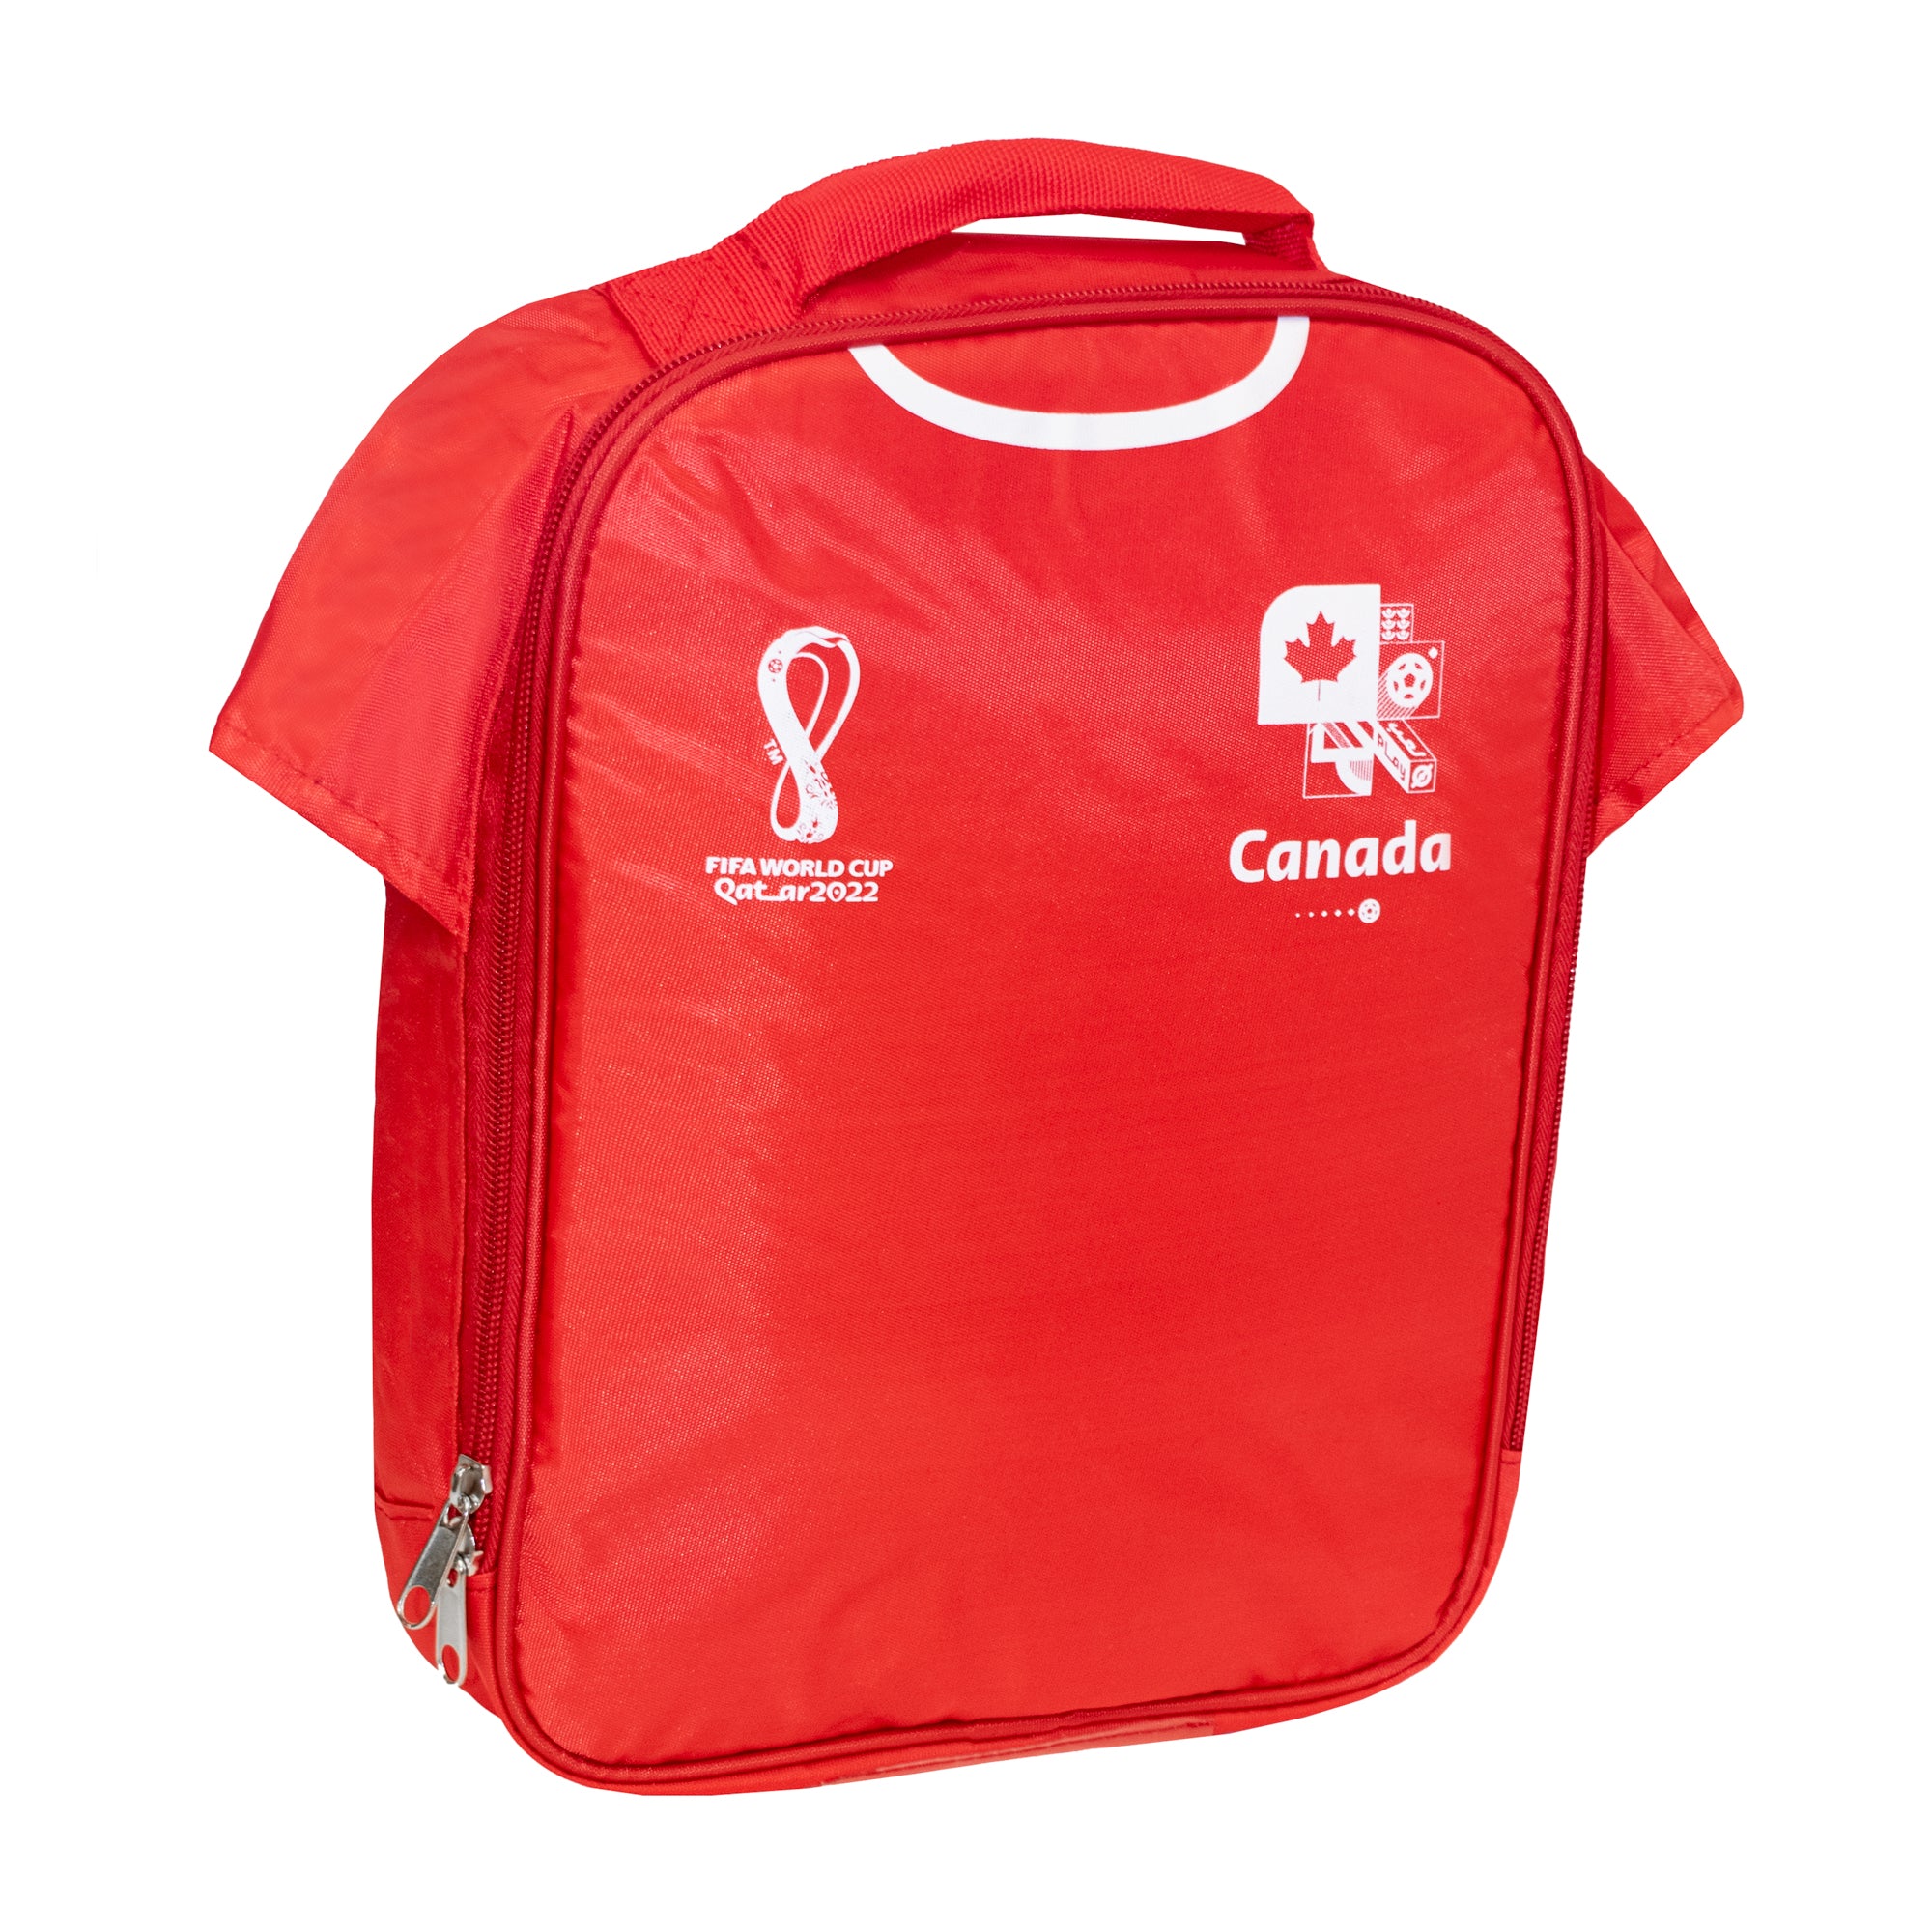 lunchbag-canada-worldcup-productimage.jpg